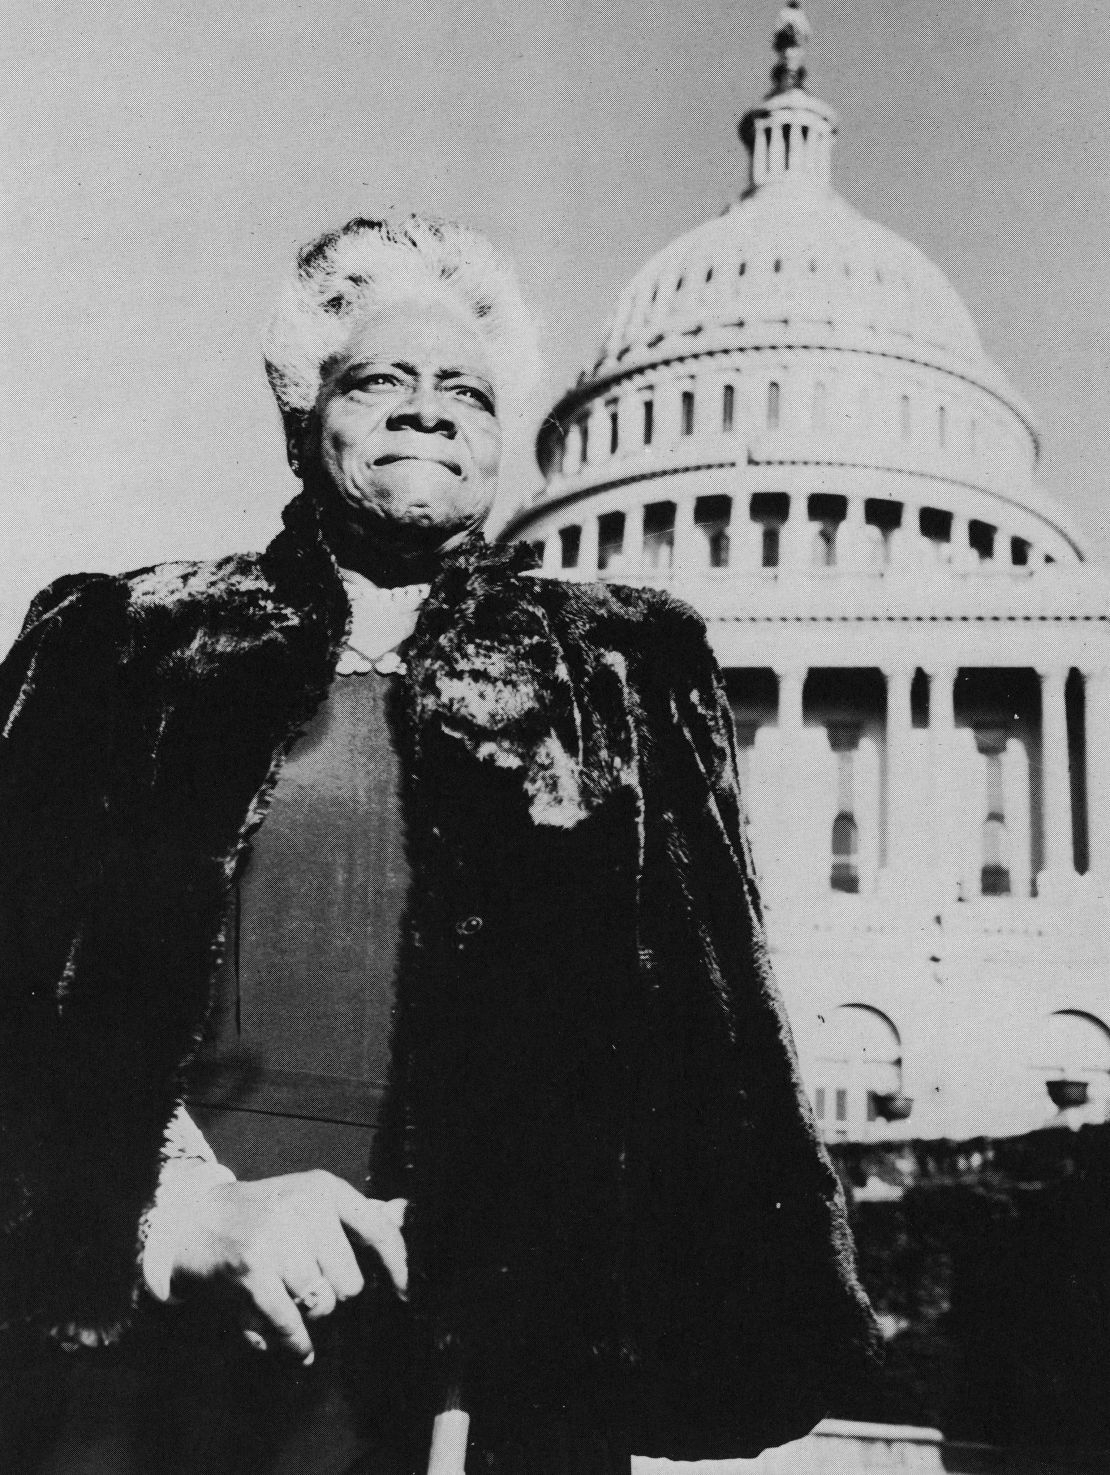 Mary McLeod Bethune stands with the U.S. Capitol in the background, circa 1950.